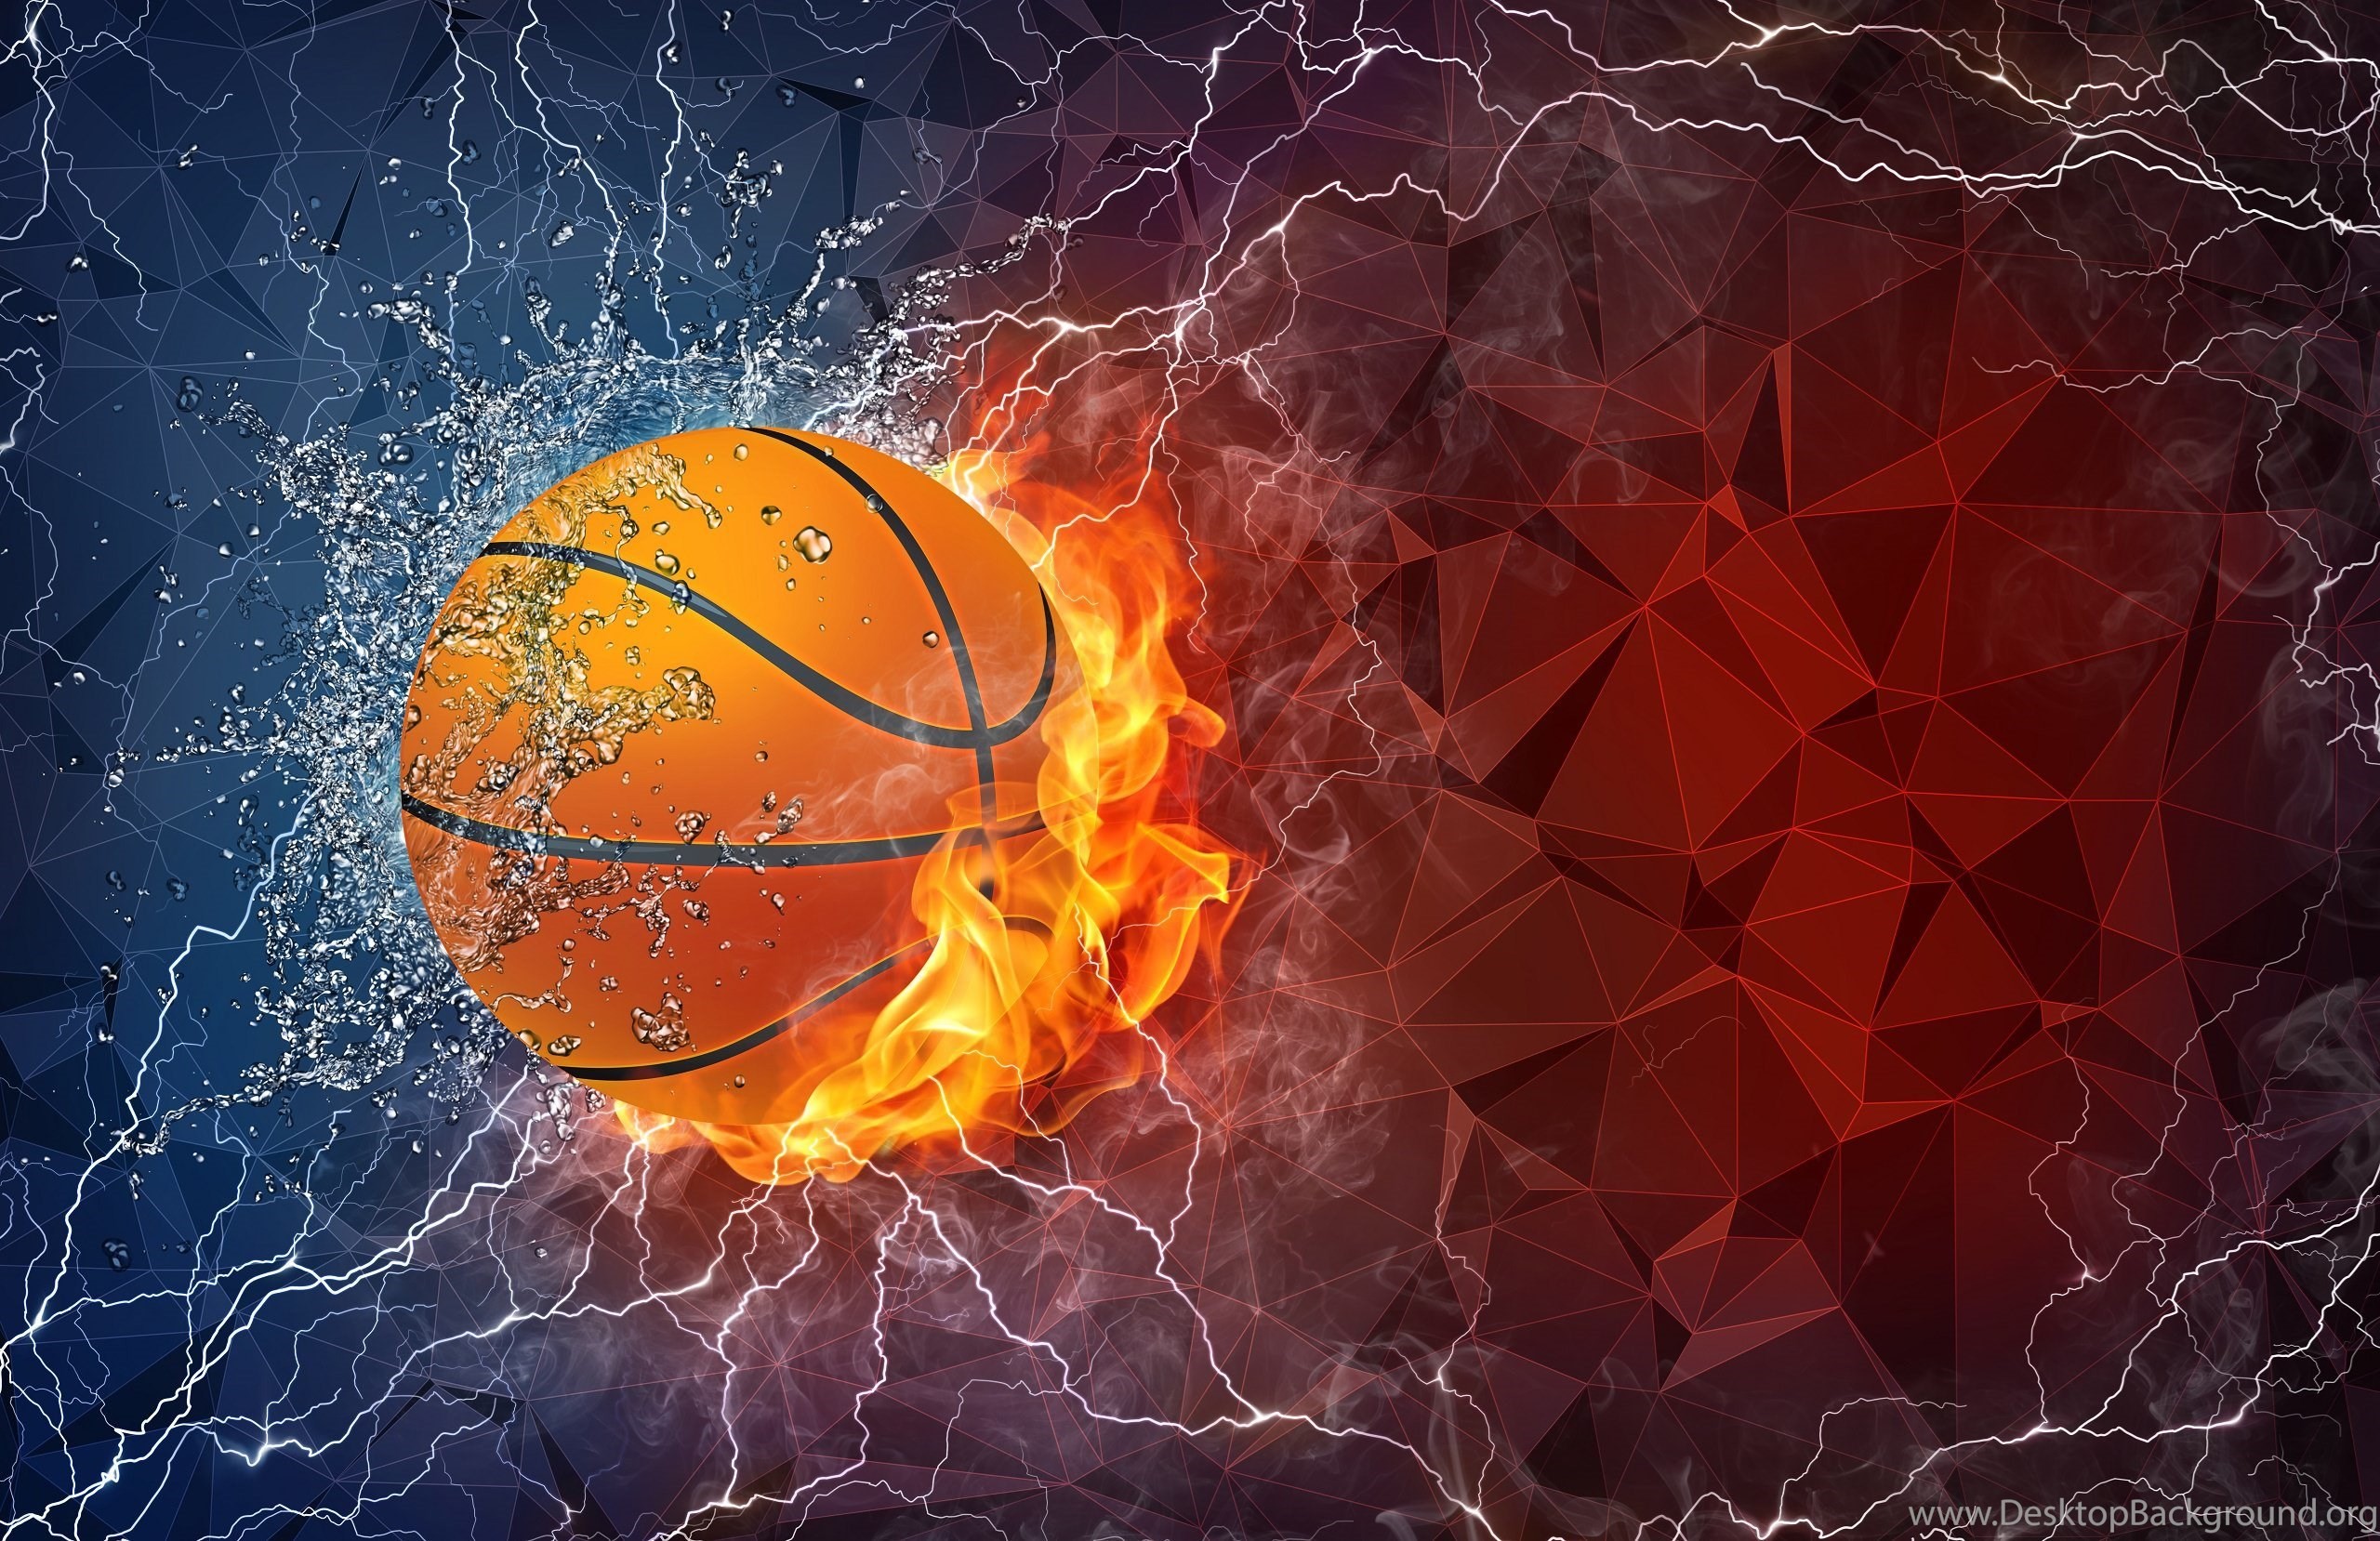 2560x1658 25+ Basketball Wallpapers, Backgrounds, Images